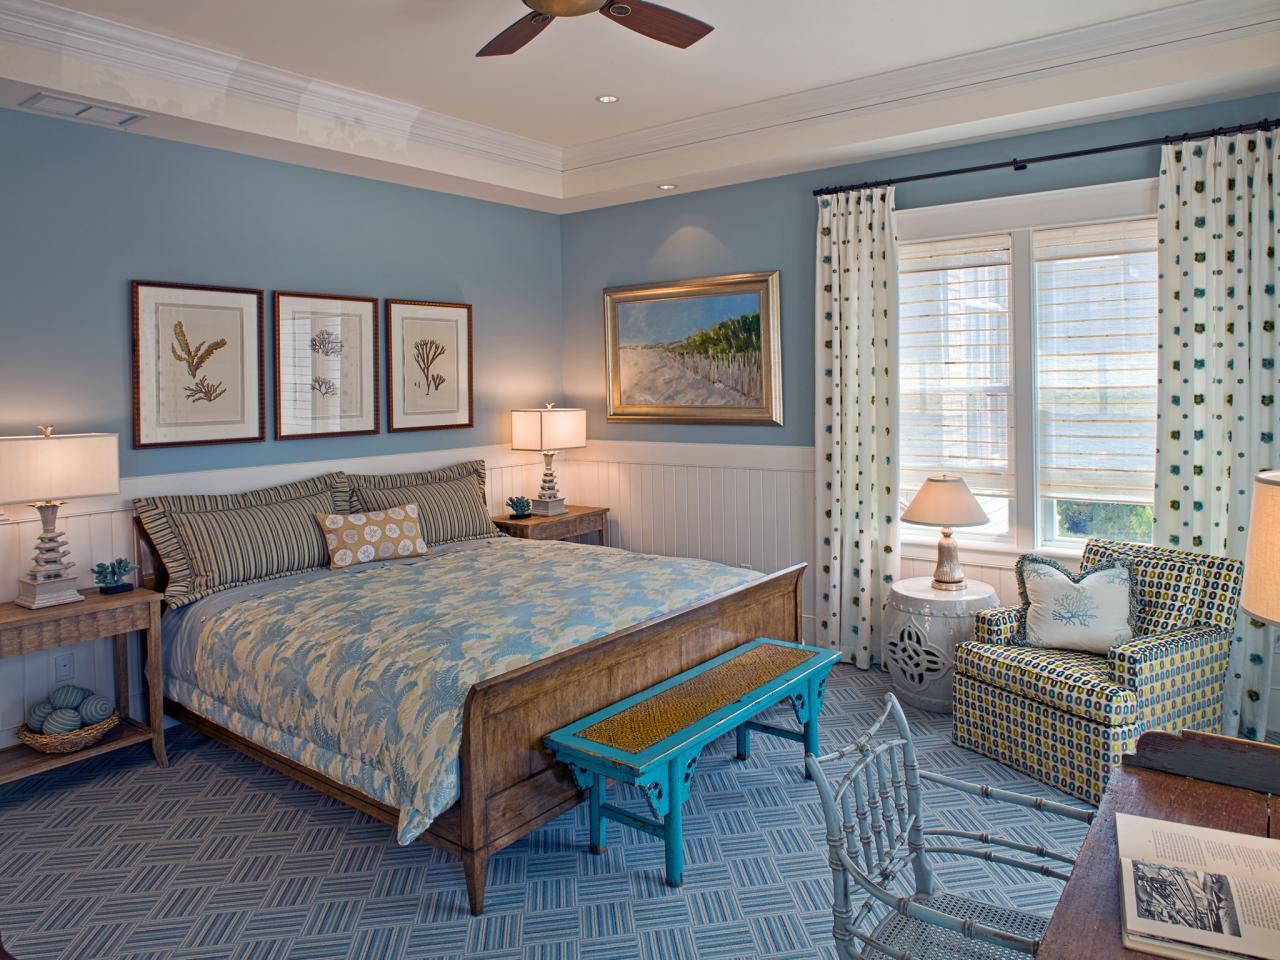 Decorating A Master Bedroom In Blue